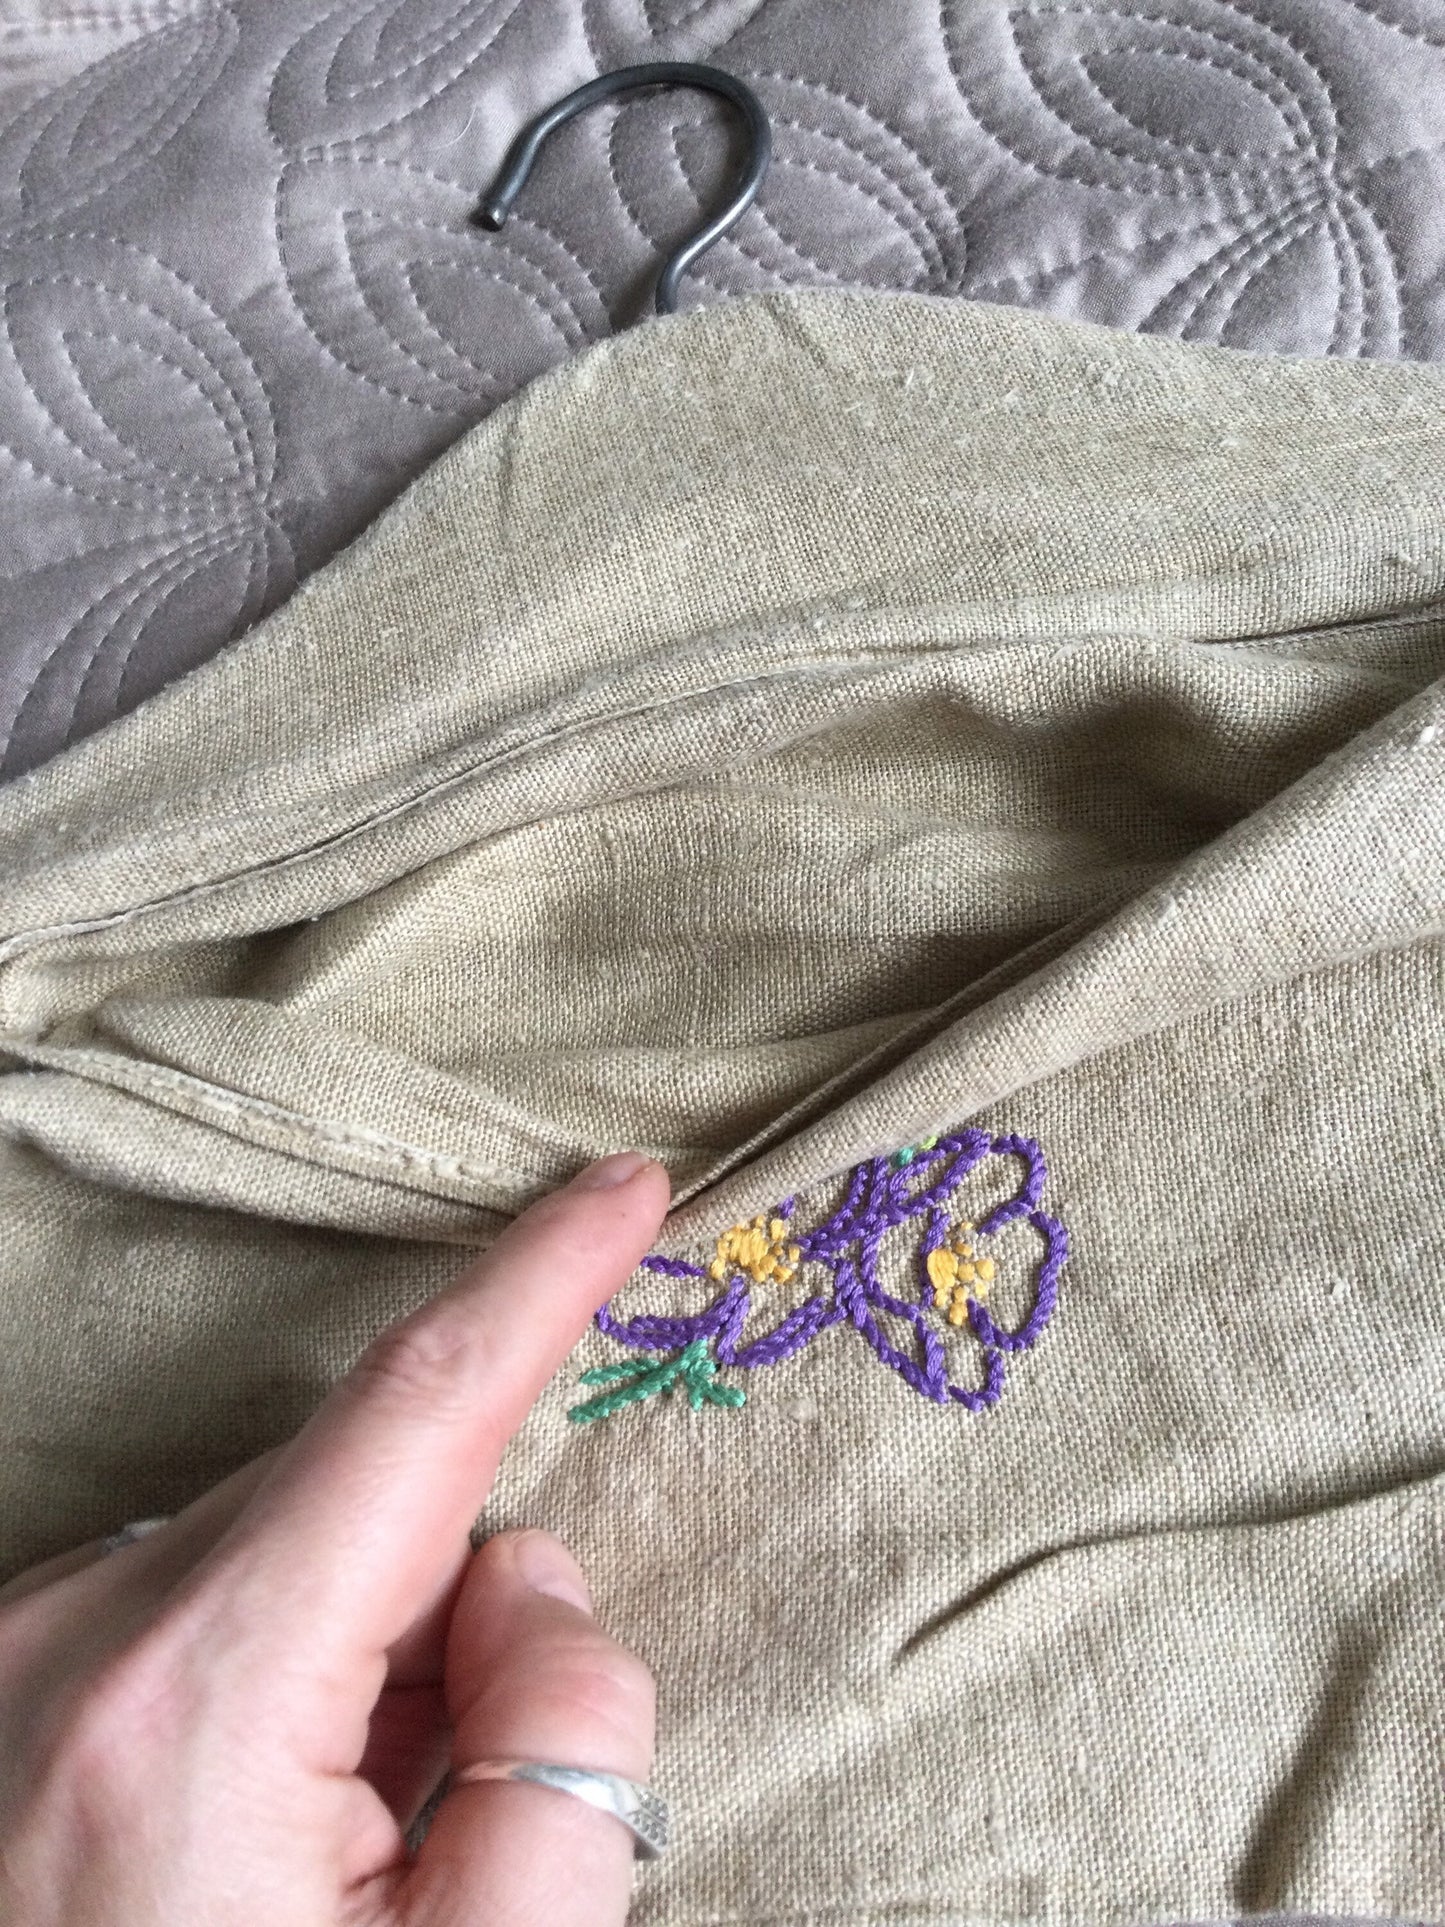 Vintage hessian brown cotton hanging PEG BAG purple embroidered pouch